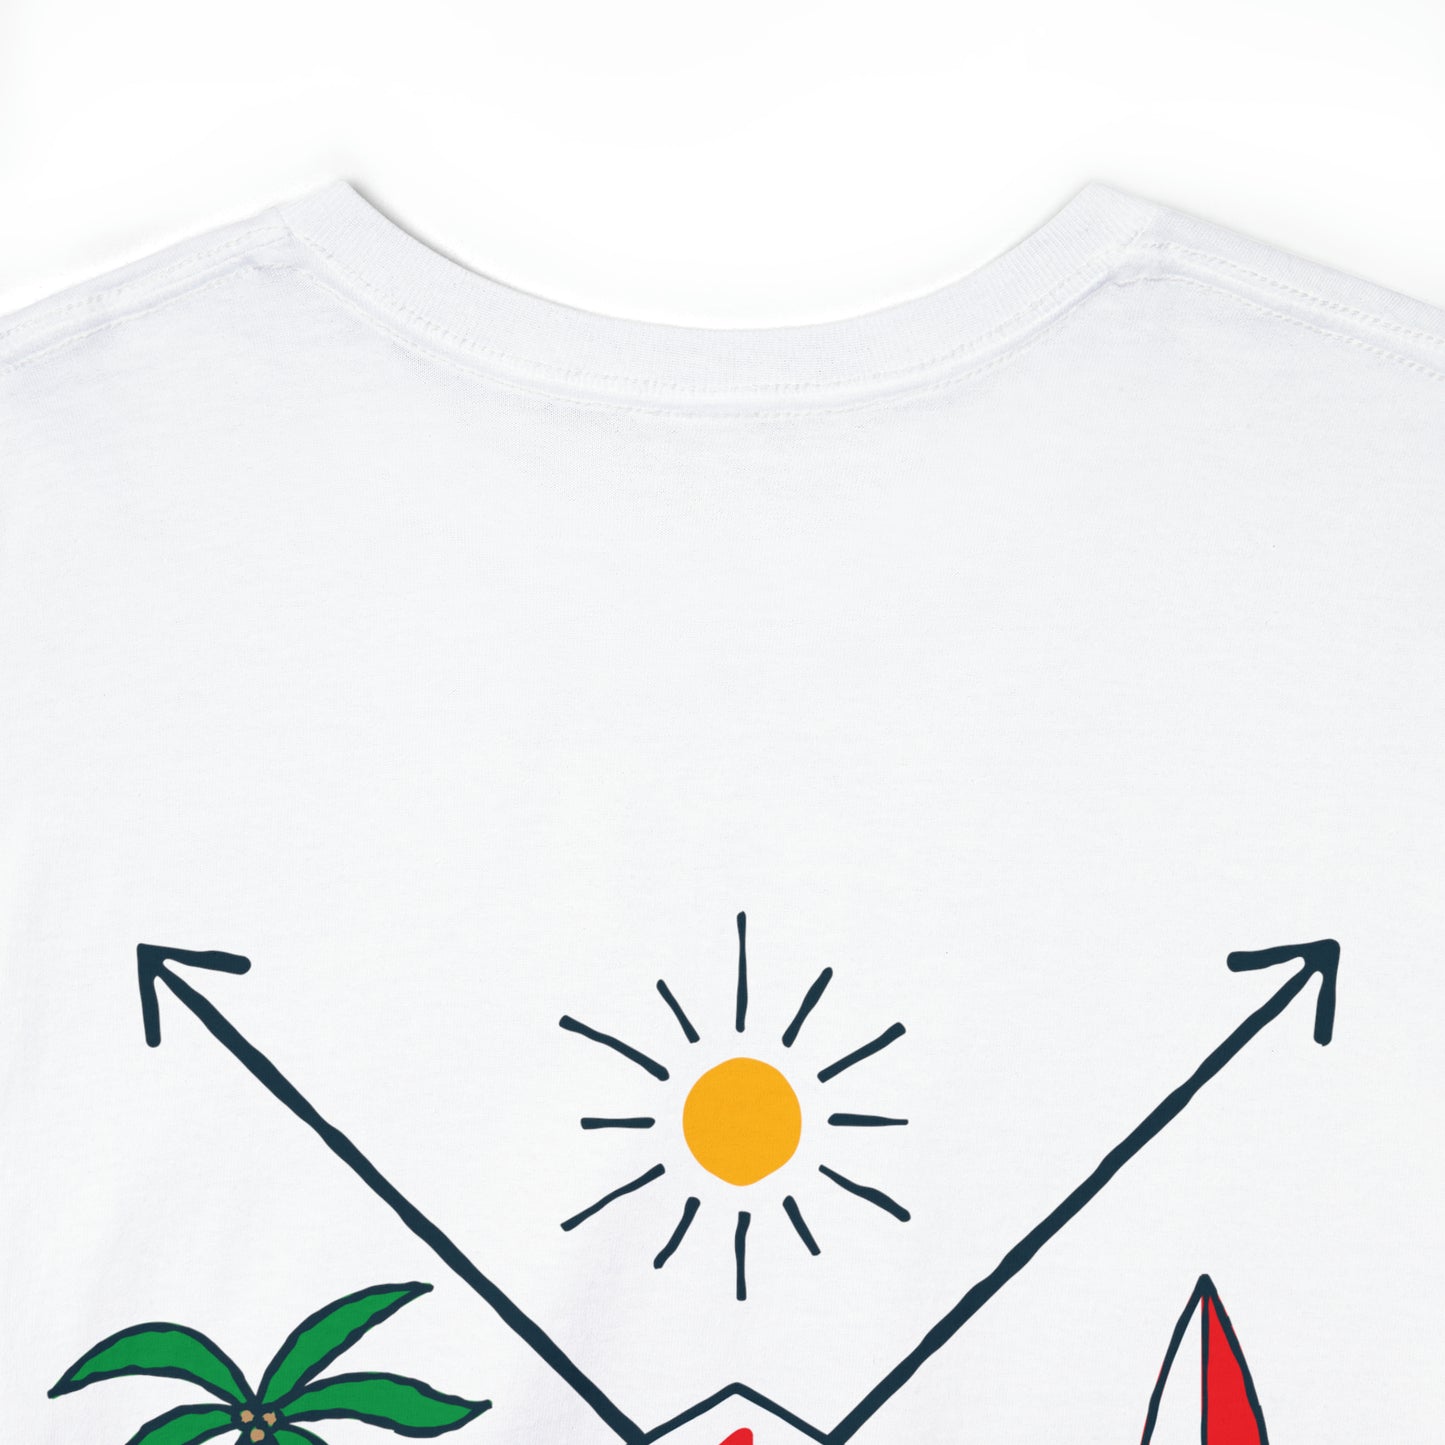 Endless Summer by Pinguin Unisex Heavy Cotton Tee